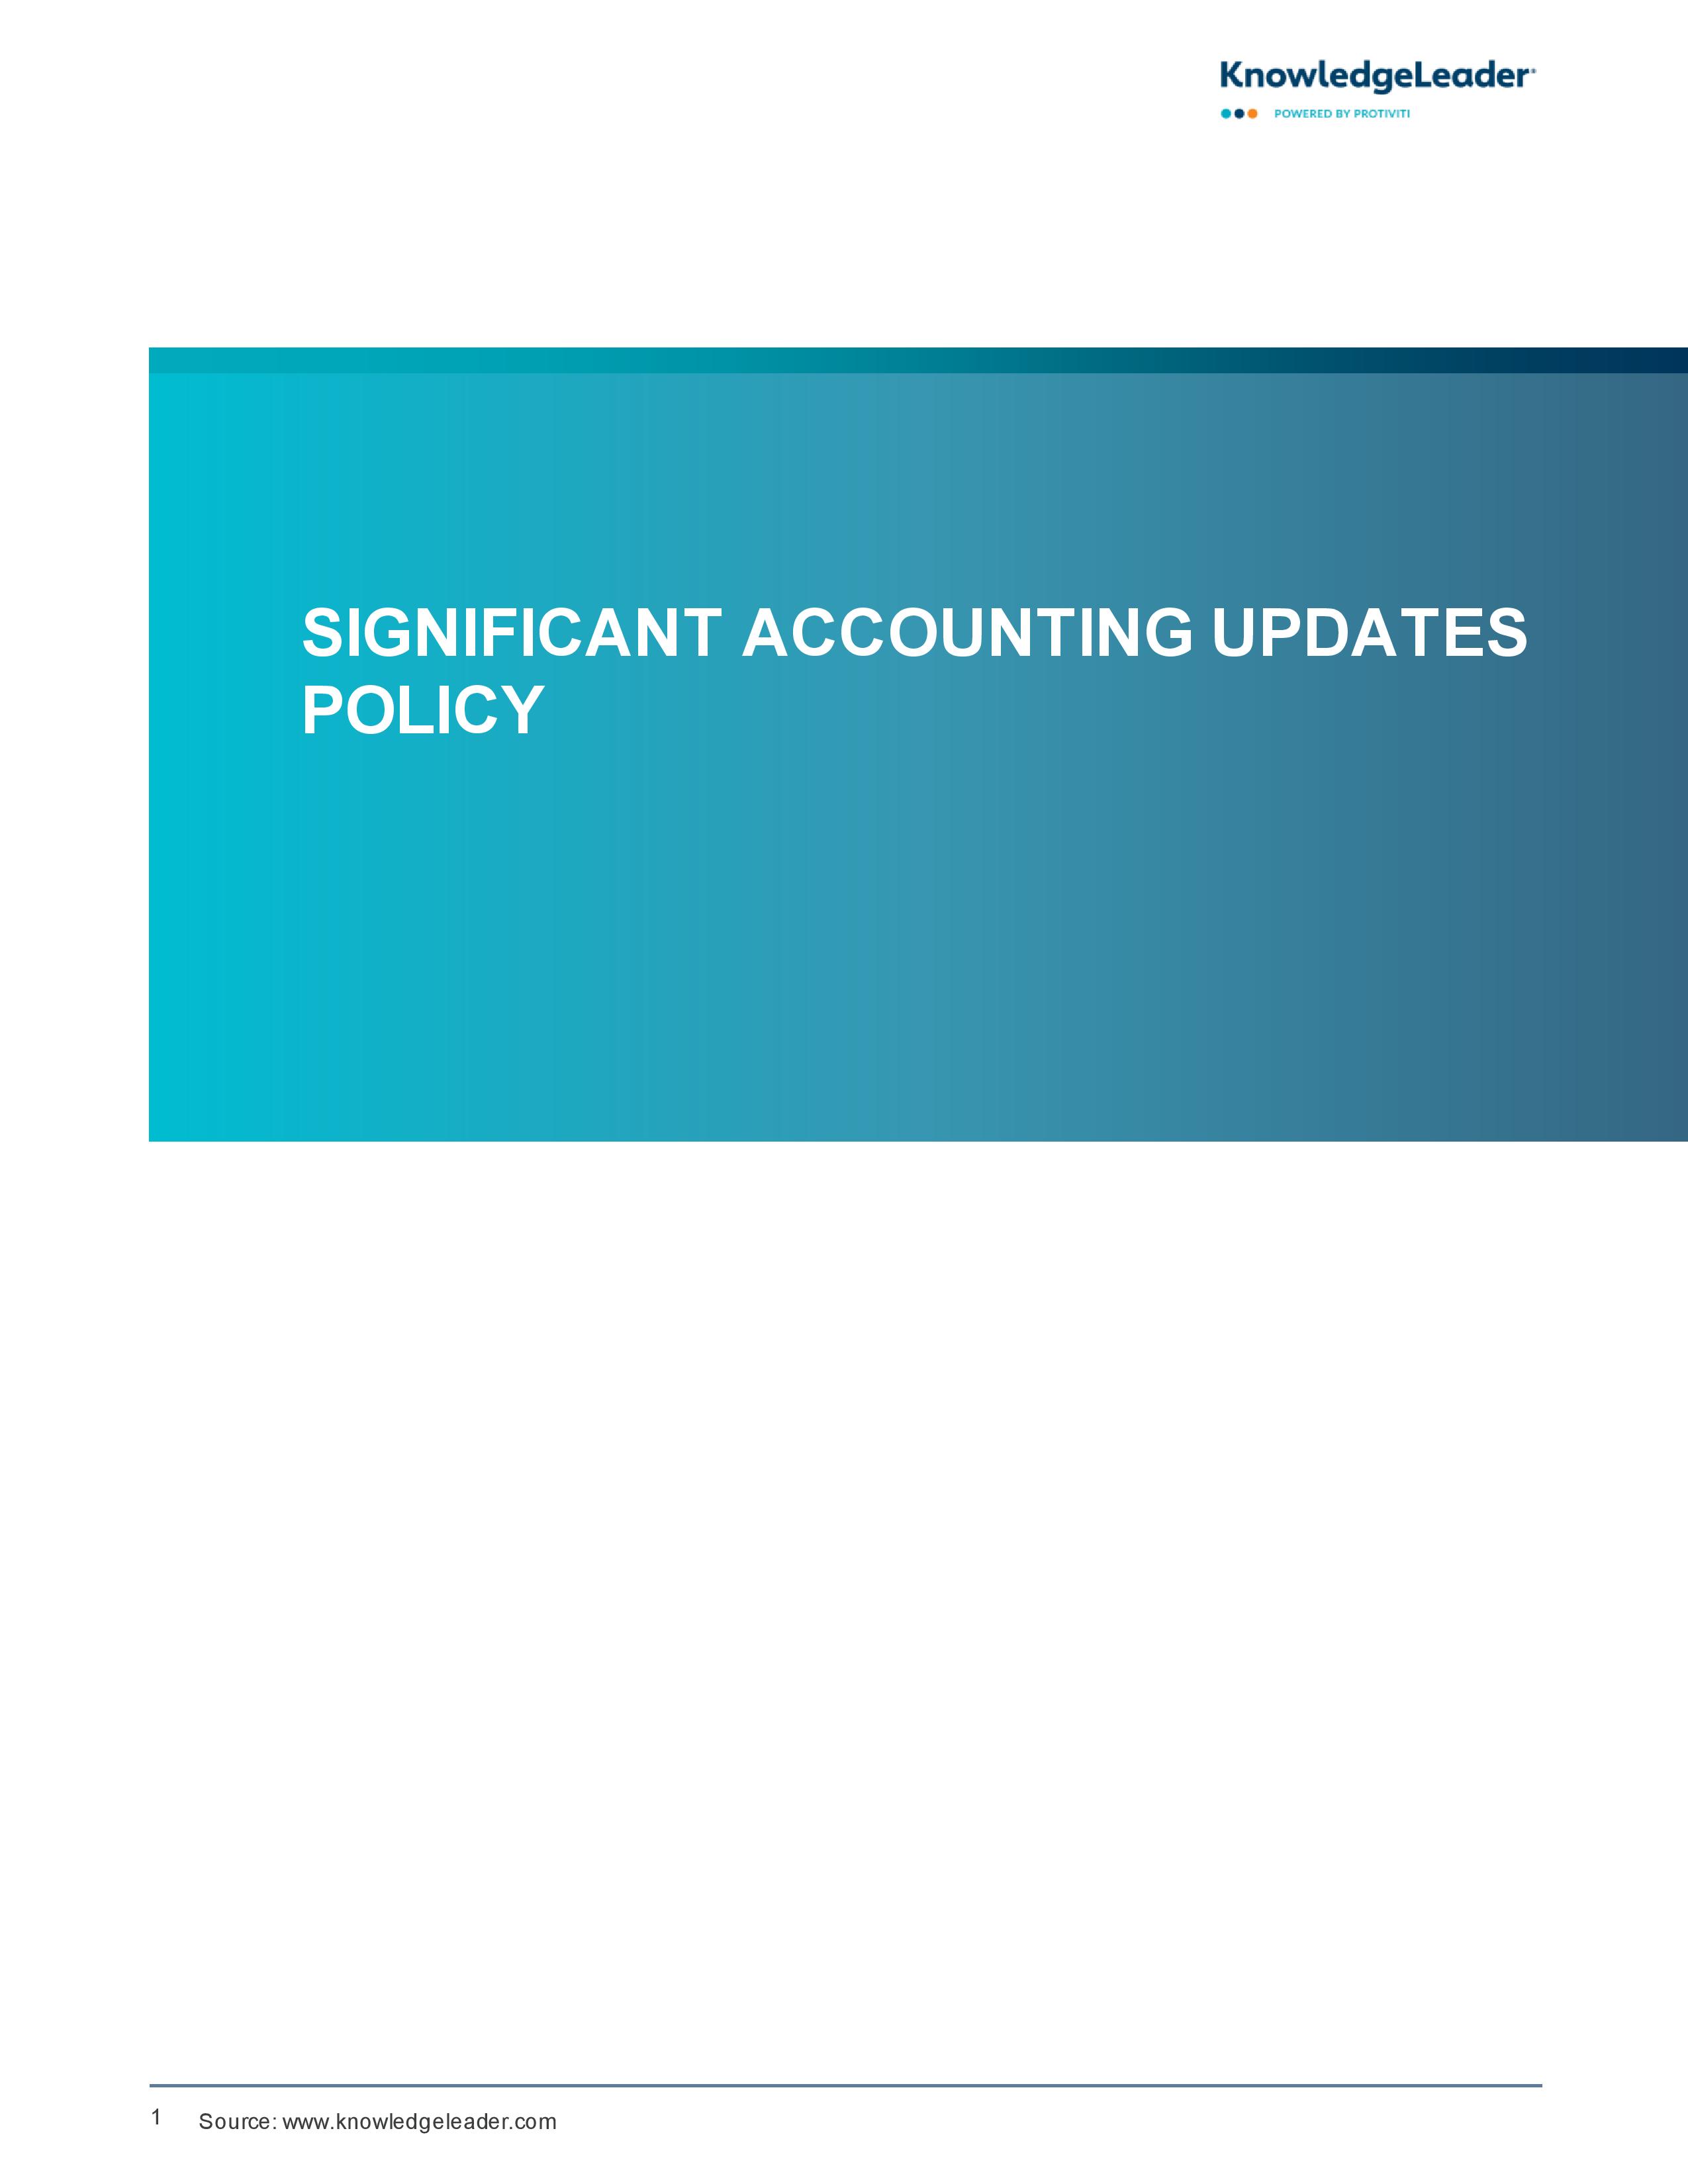 Screenshot of the first page of Significant Accounting Updates Policy